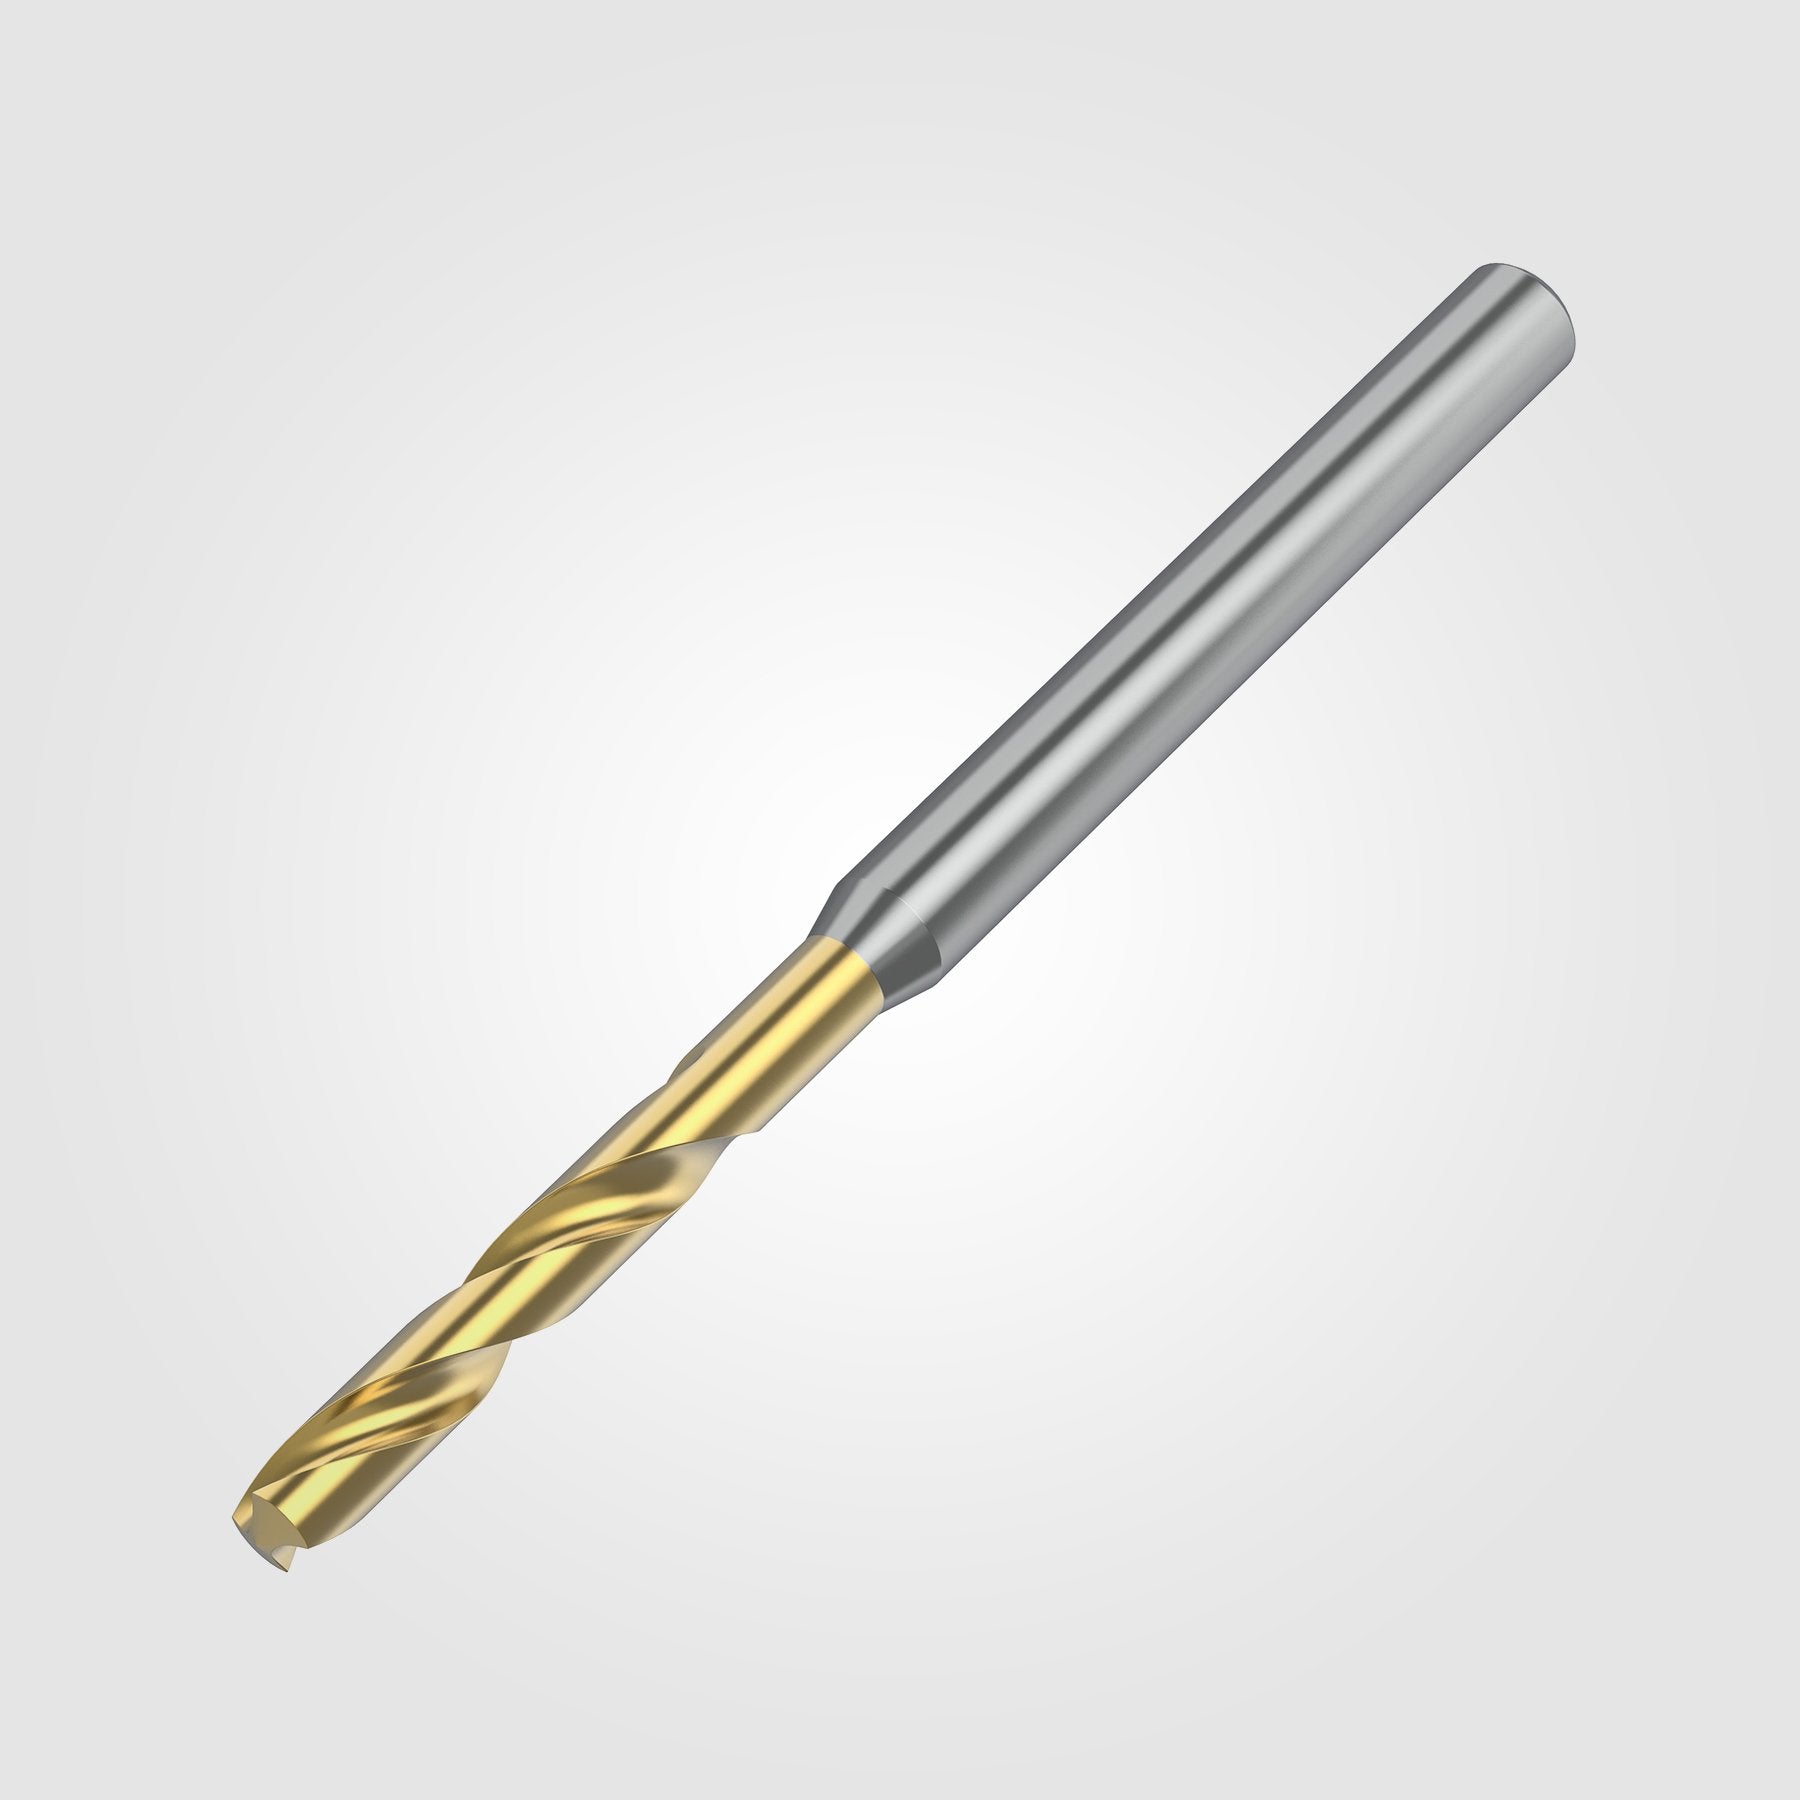 GOdrill (THROUGH COOLANT) | 15.4mm / .6063" / 3xD | SOLID CARBIDE DRILL | 4151268